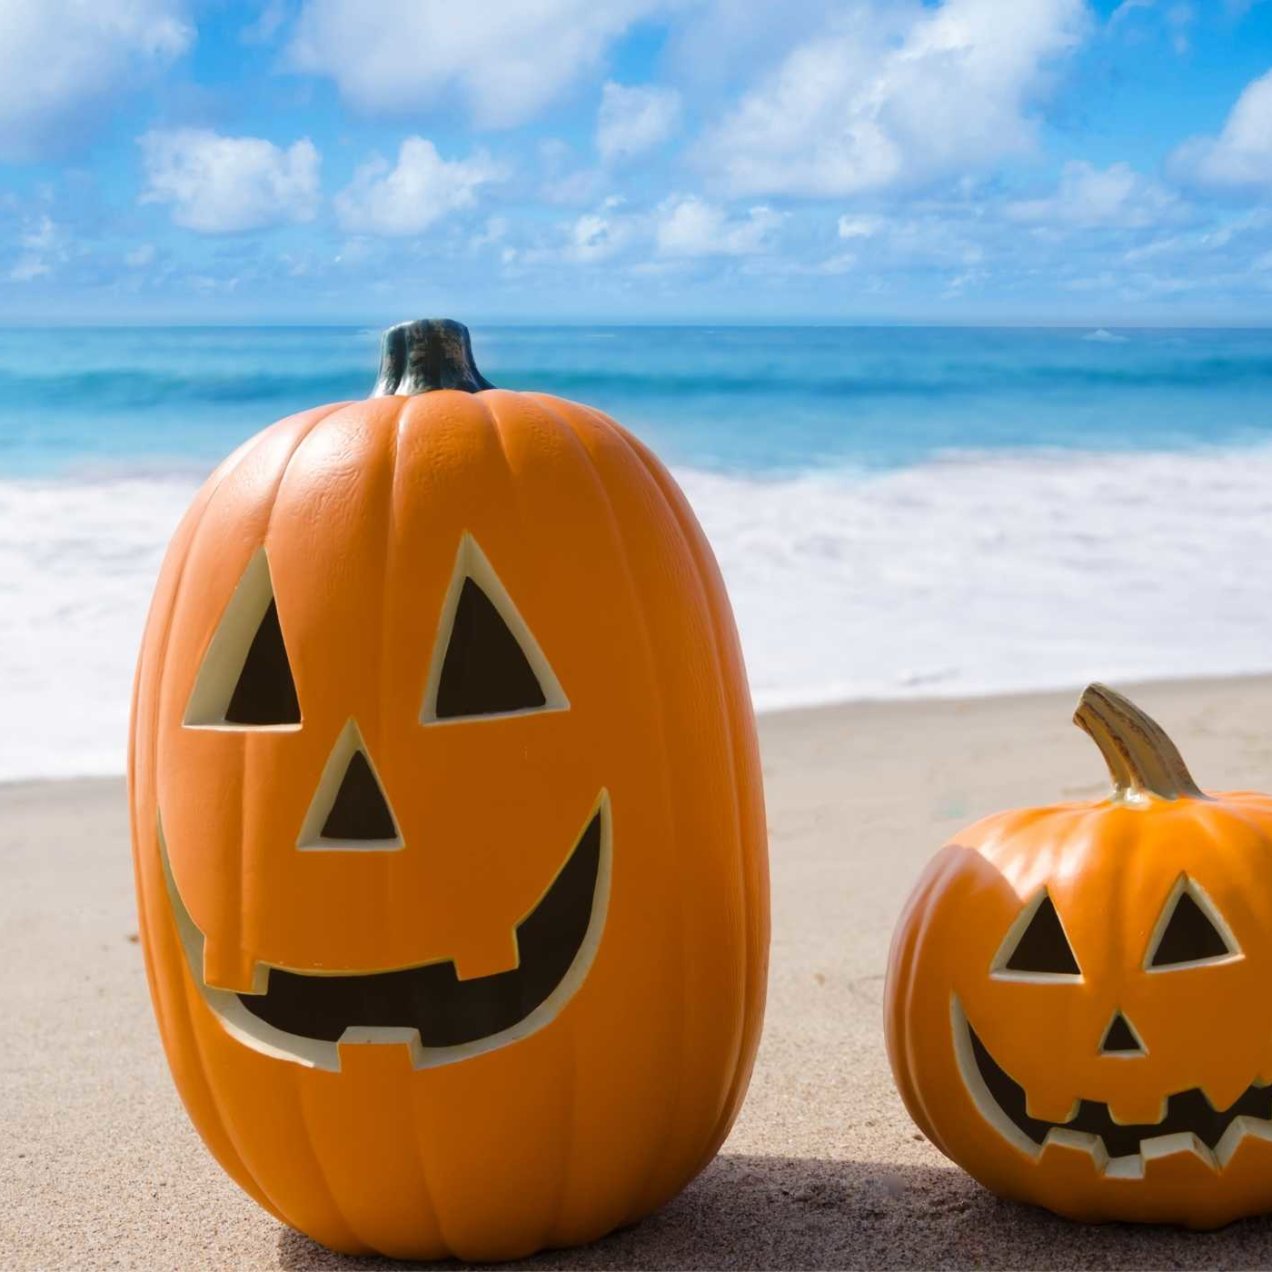 Halloween vacation in Paradise